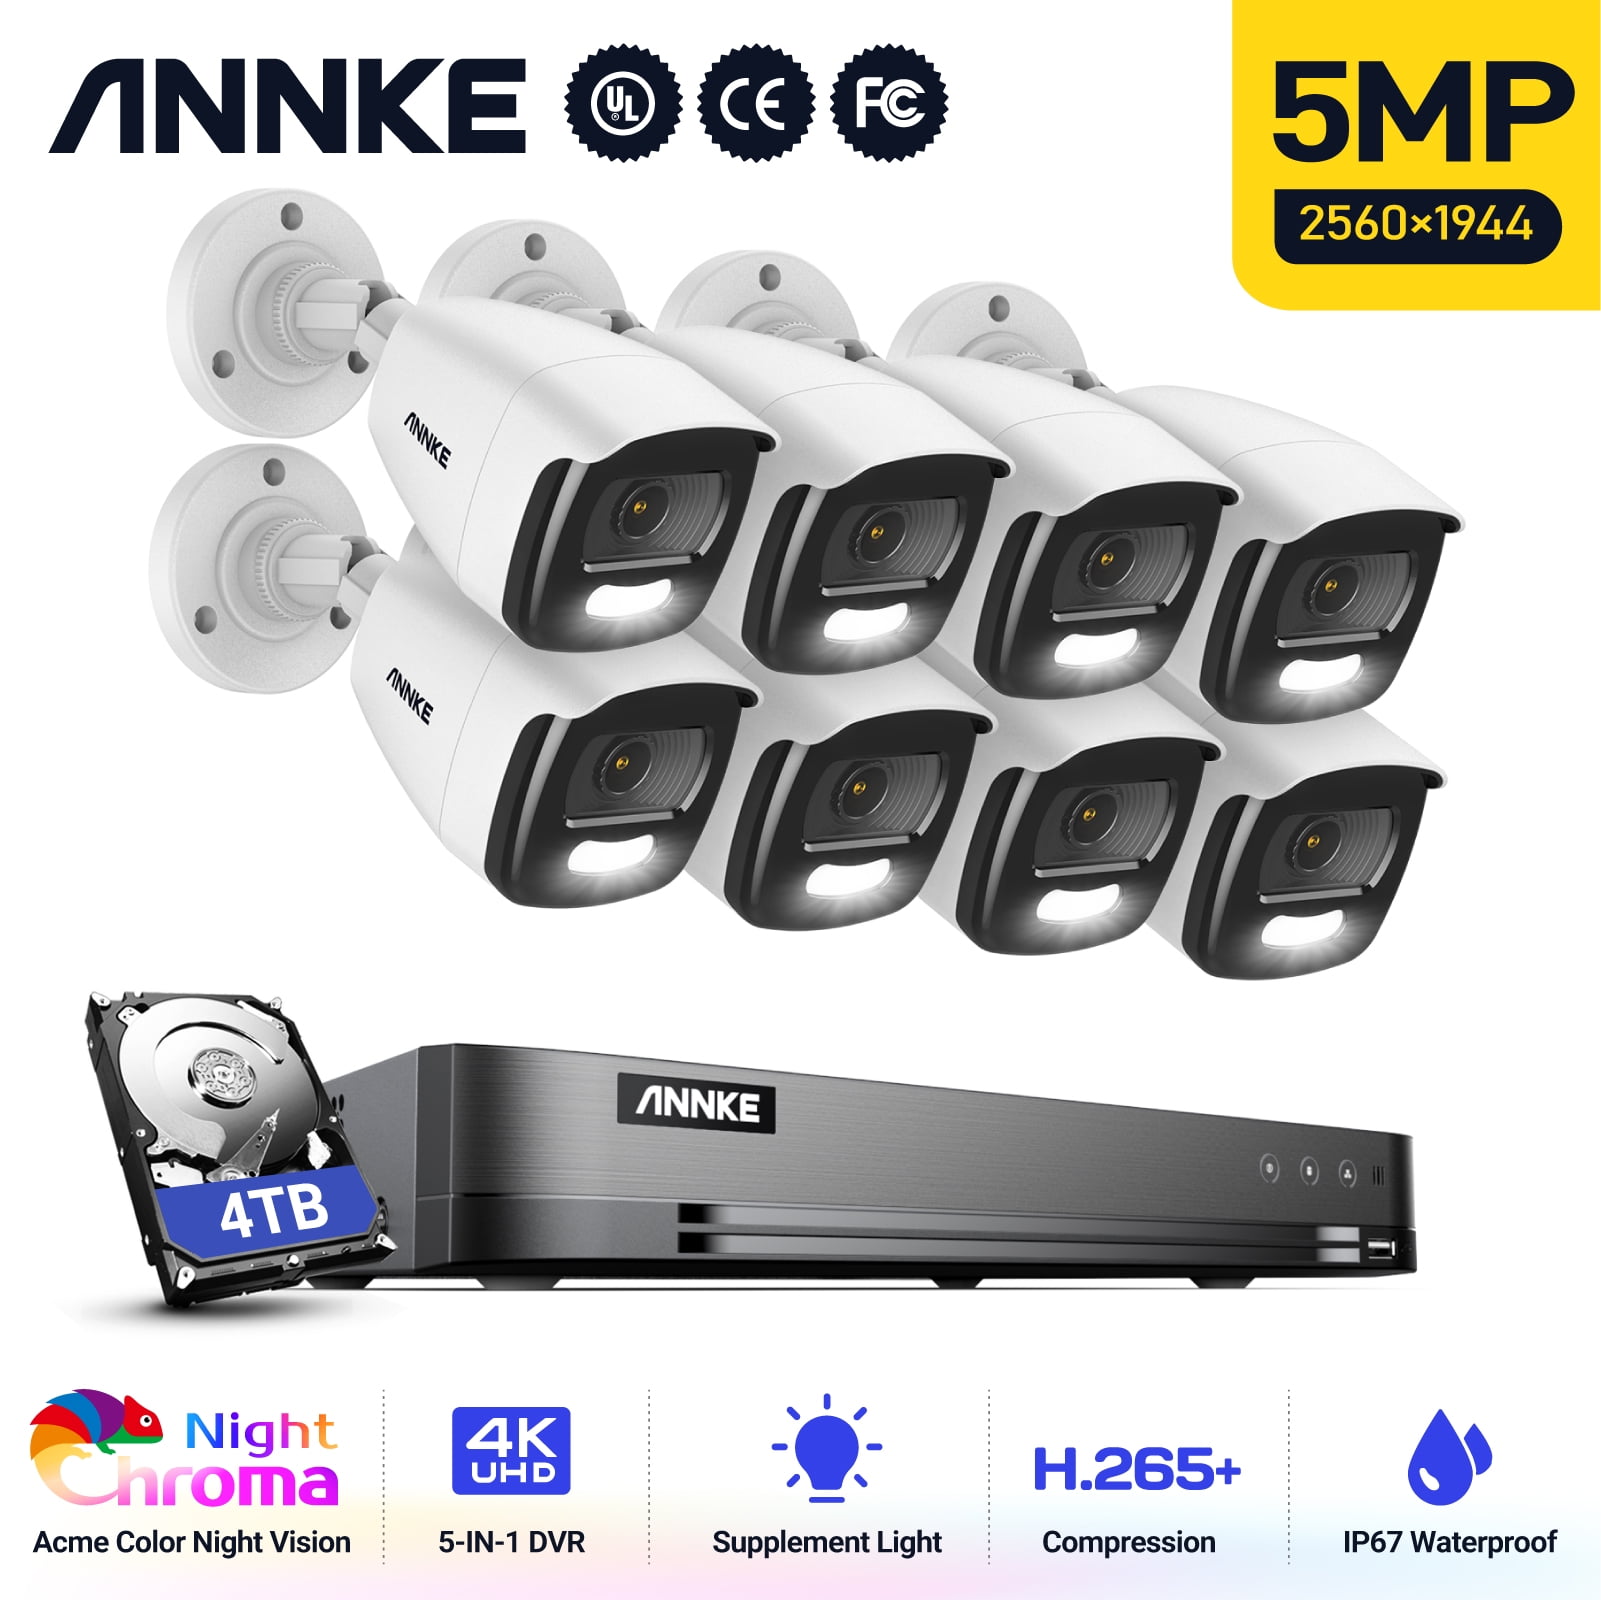 ANNKE ANNKE 5MP CCTV System 8MP 16CH NVR Full Color Night Vision Security Camera Kit 